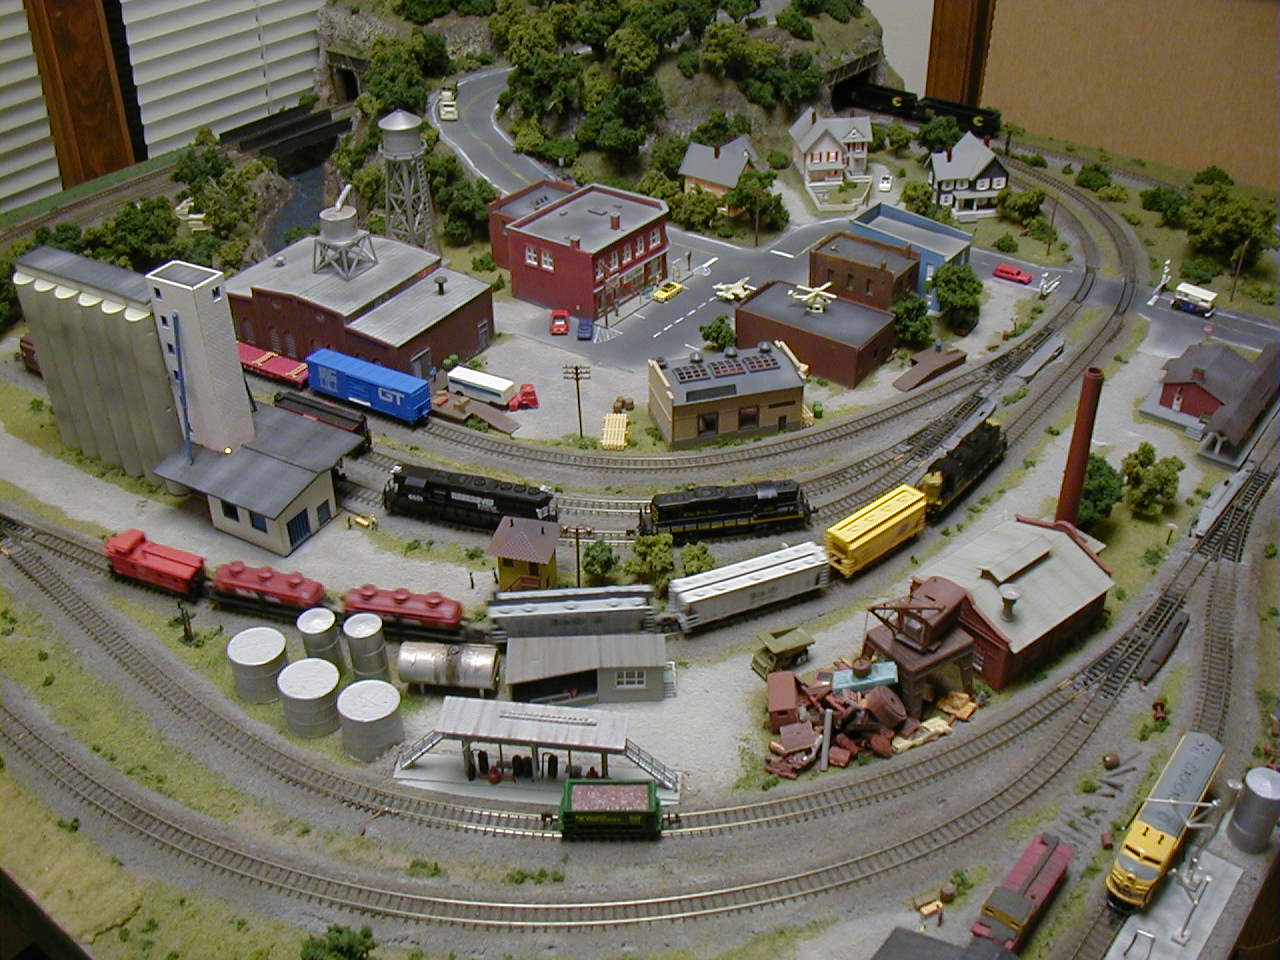 Model Train Layouts Pictures to pin on Pinterest